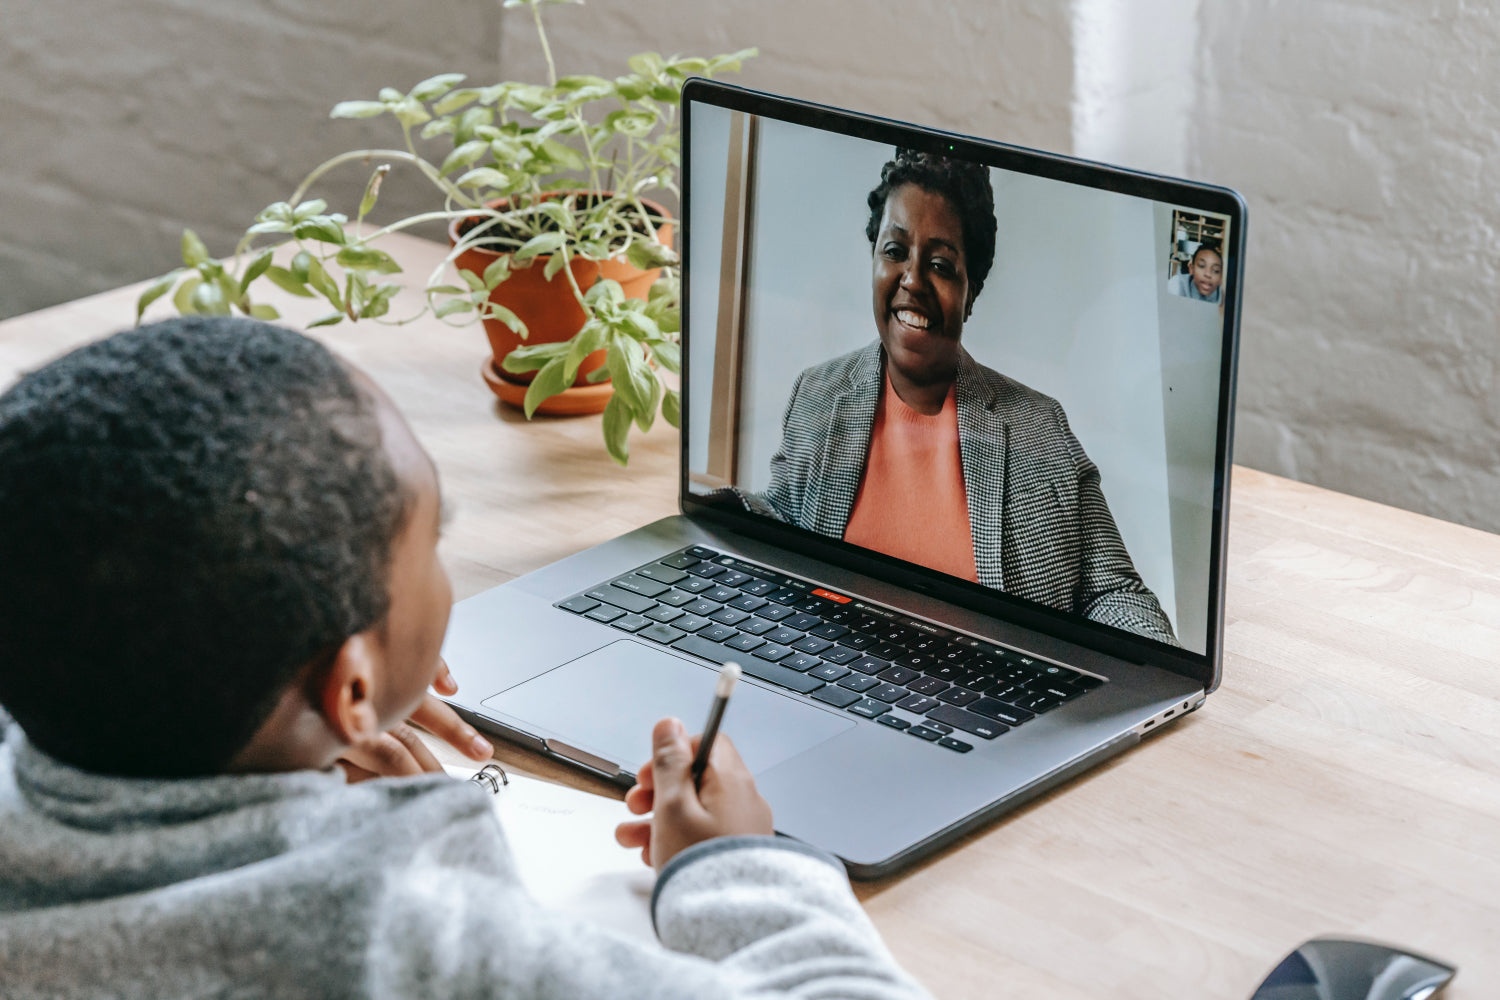 A child speaks to a woman over a video chat on a laptop